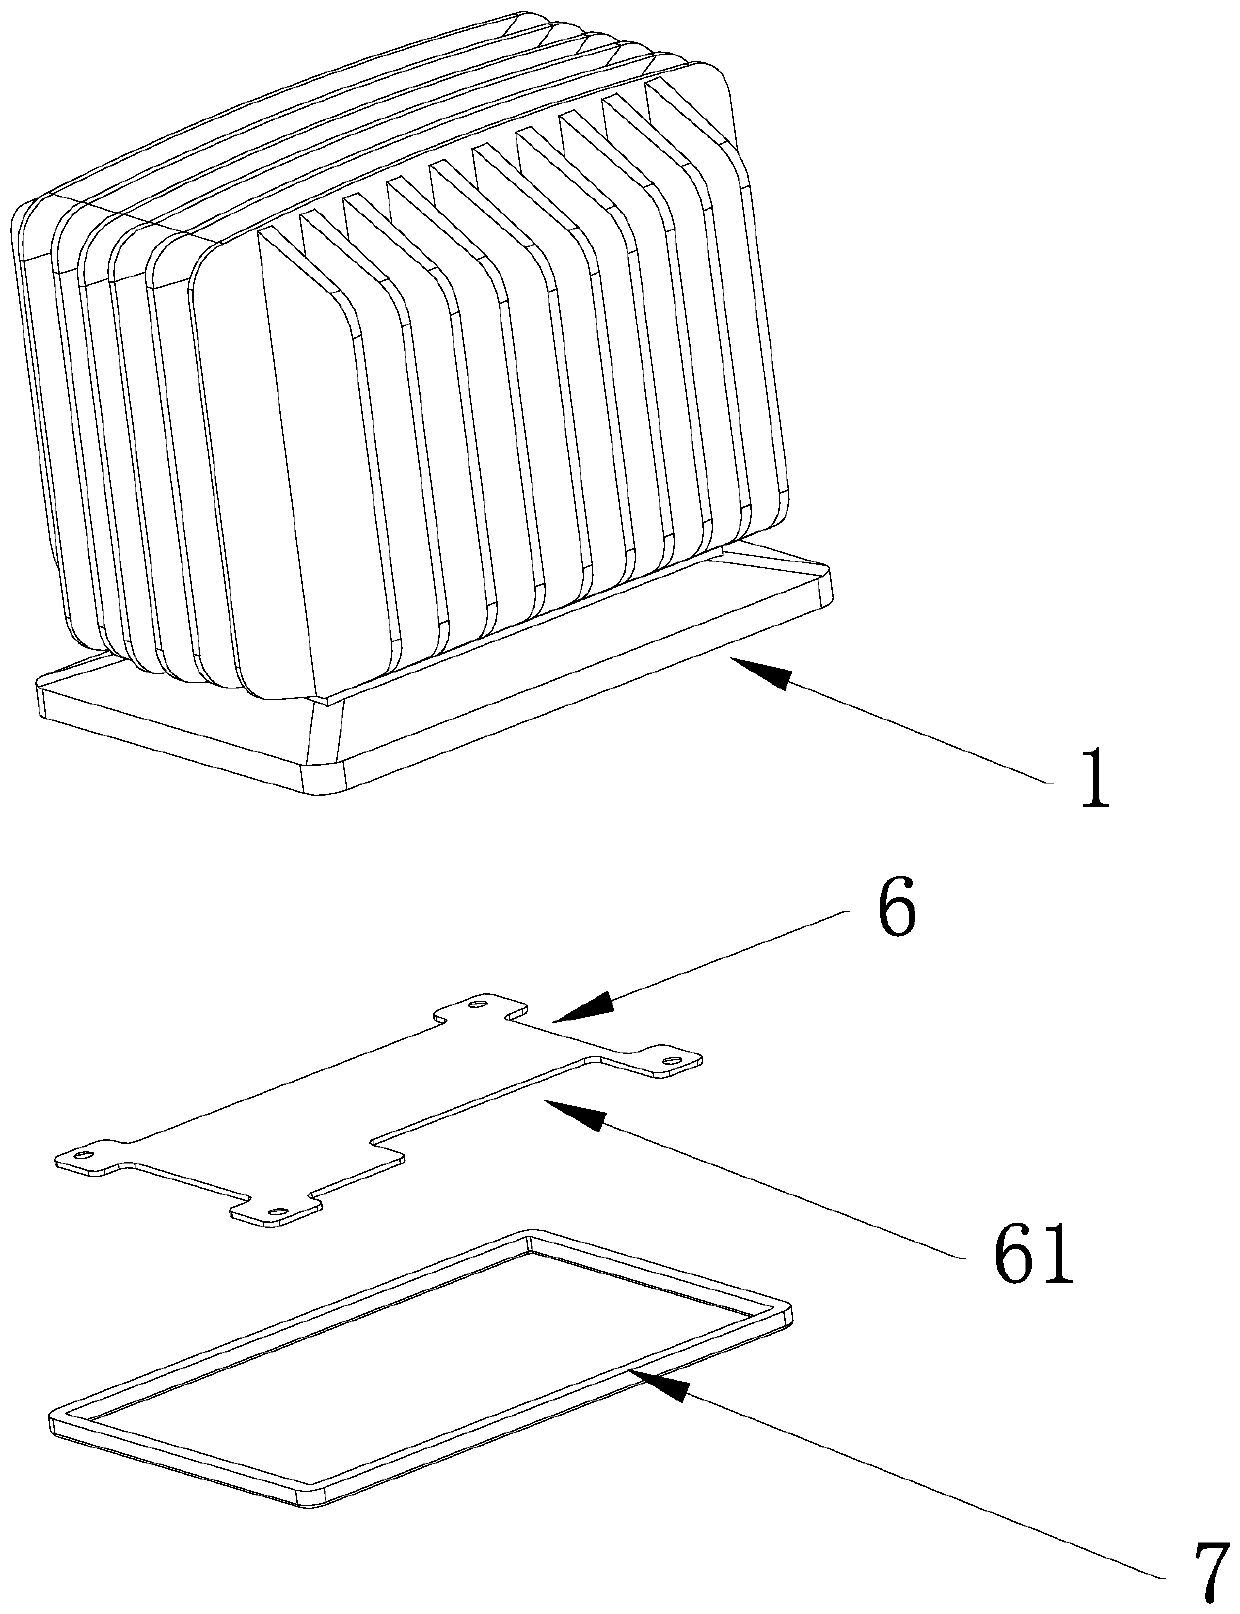 A wrapped heat sink and an inductance efficient heat dissipation structure